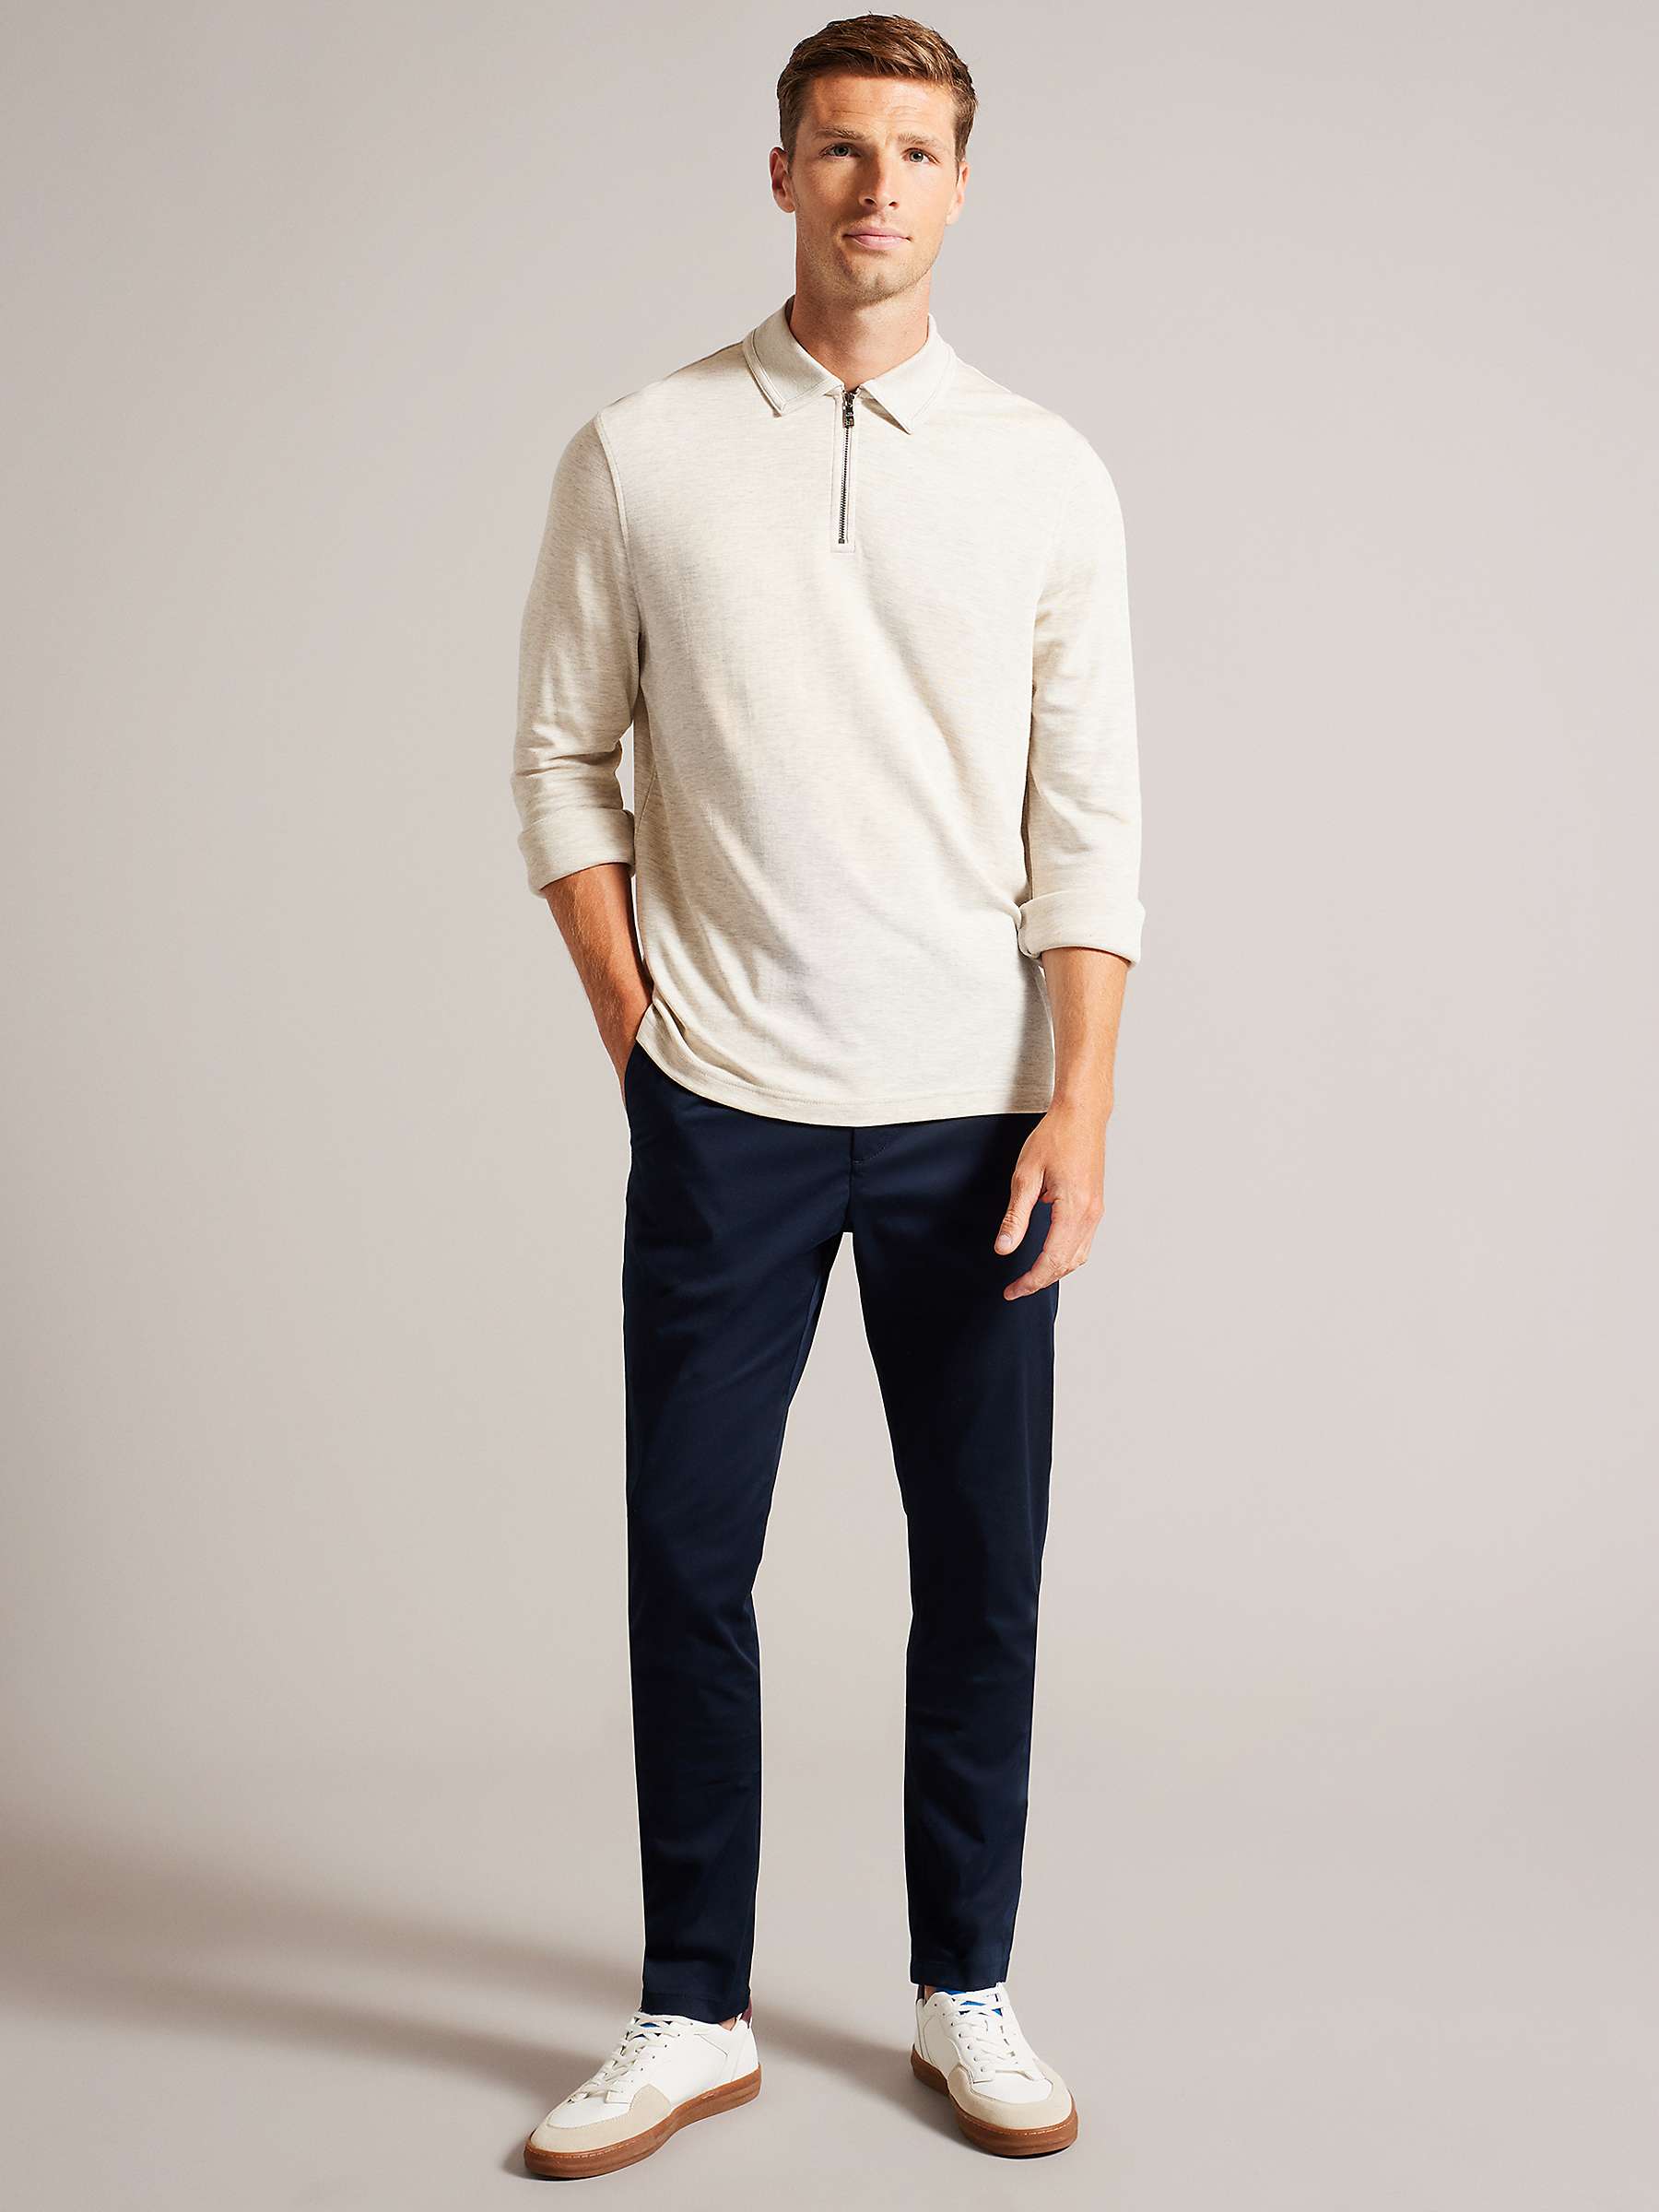 Ted Baker Danay Irvine Slim Fit Trousers, Navy at John Lewis & Partners